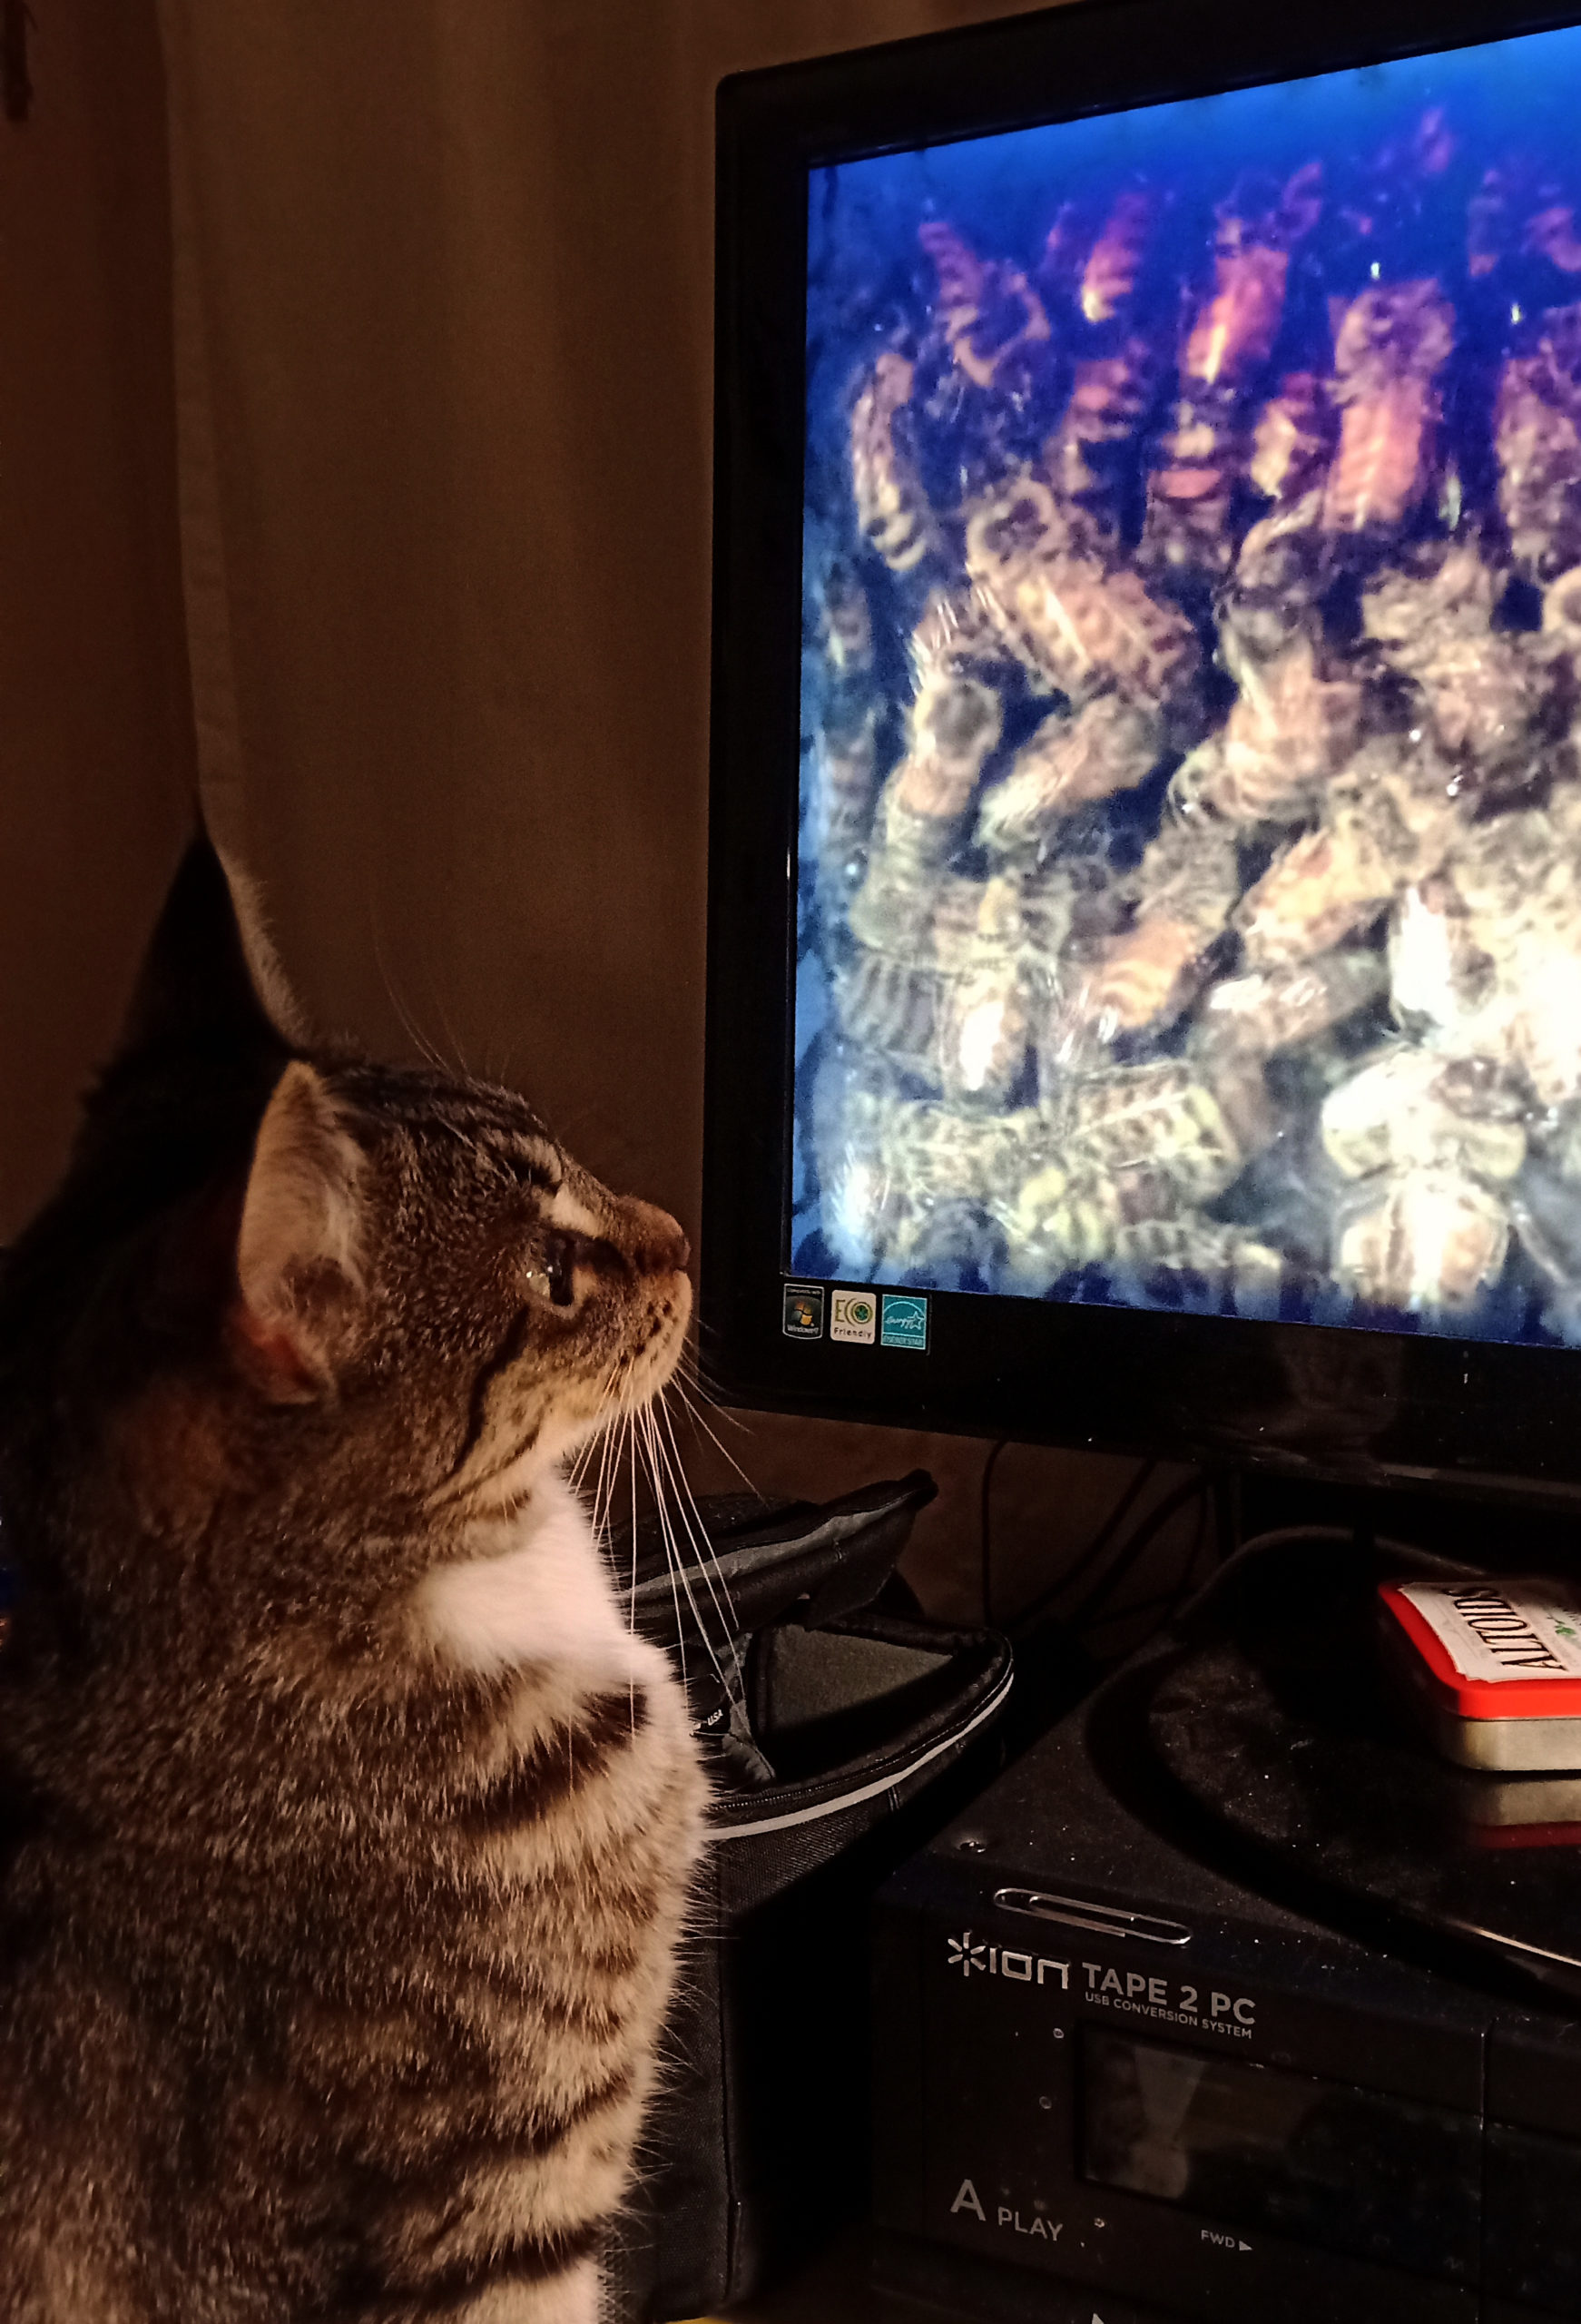 Walter watches a program about bees